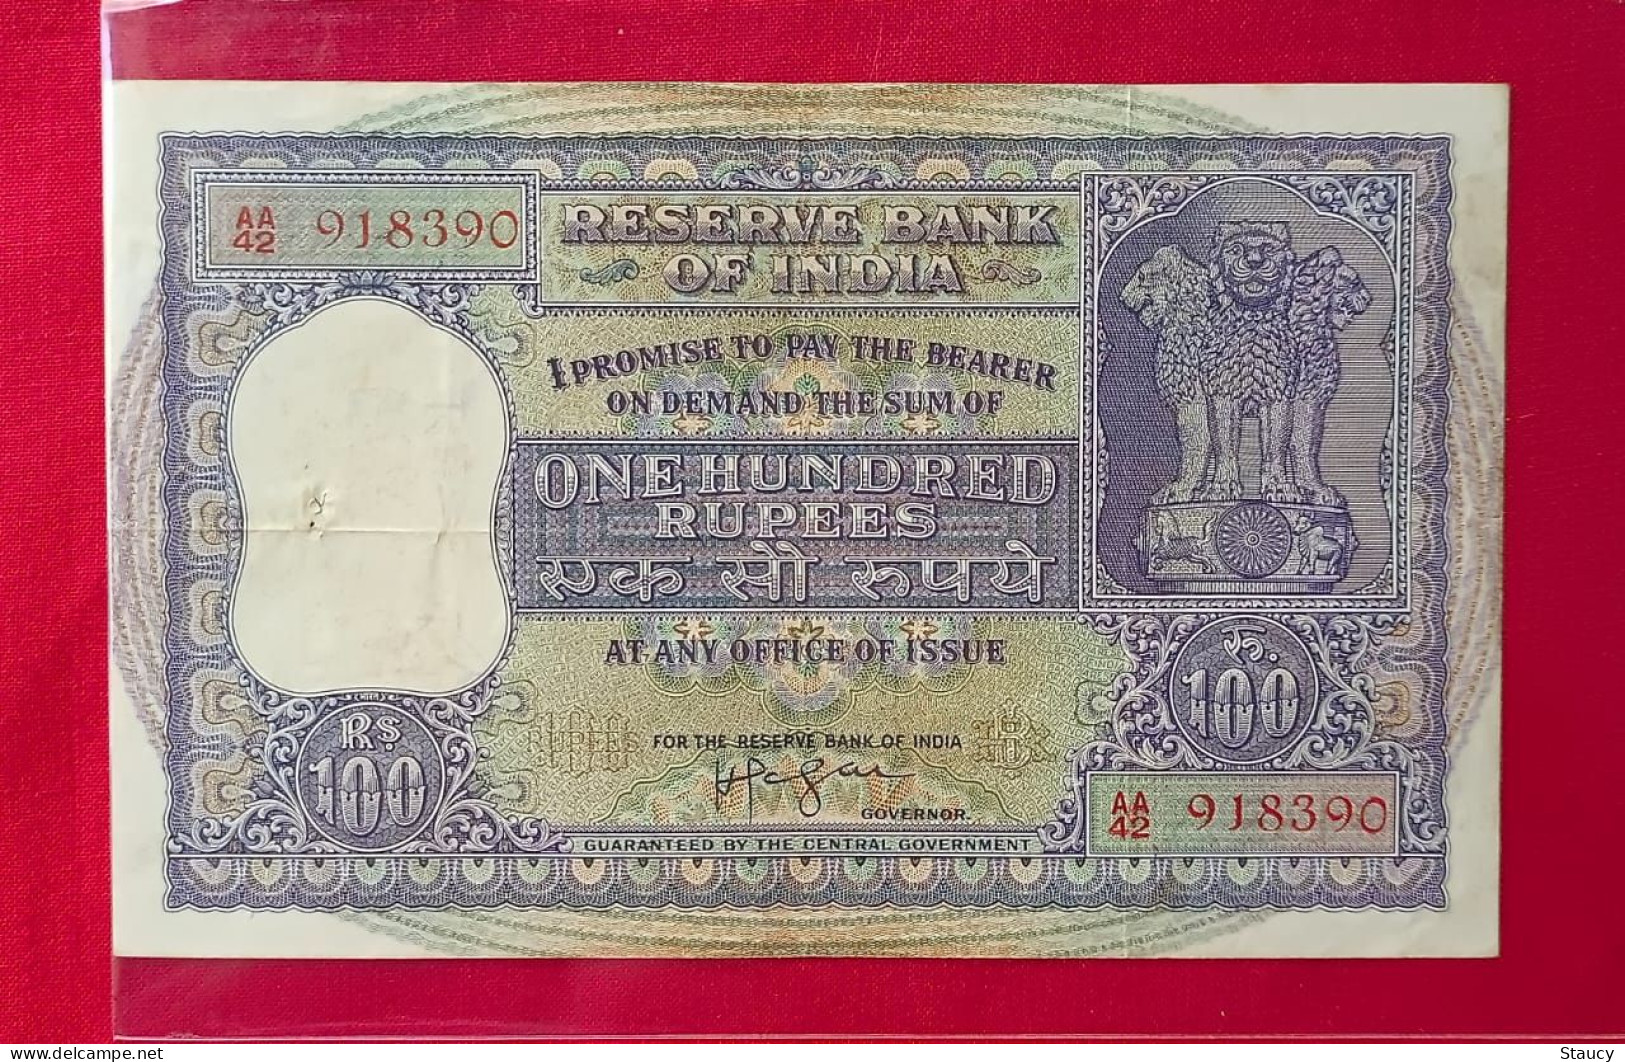 INDIA 1957 Rs.100 One Hundred Rupees Banknote Of Republic Of India Signed By H V R Iyengar Fine As Per Scan - Inde